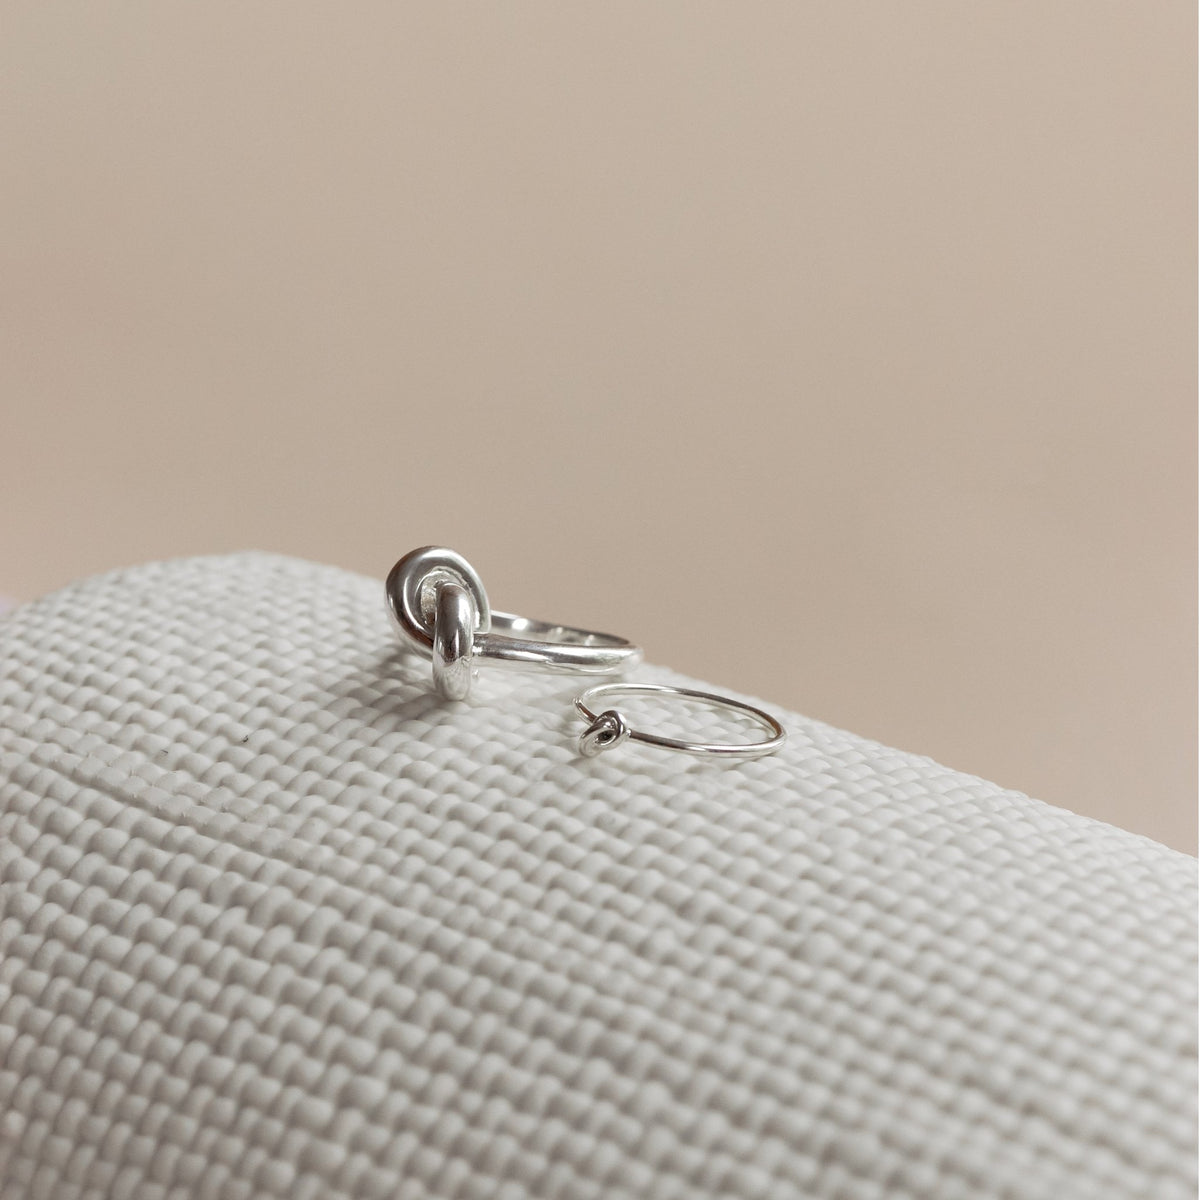 POISE KNOT COCKTAIL RING - SILVER - SO PRETTY CARA COTTER